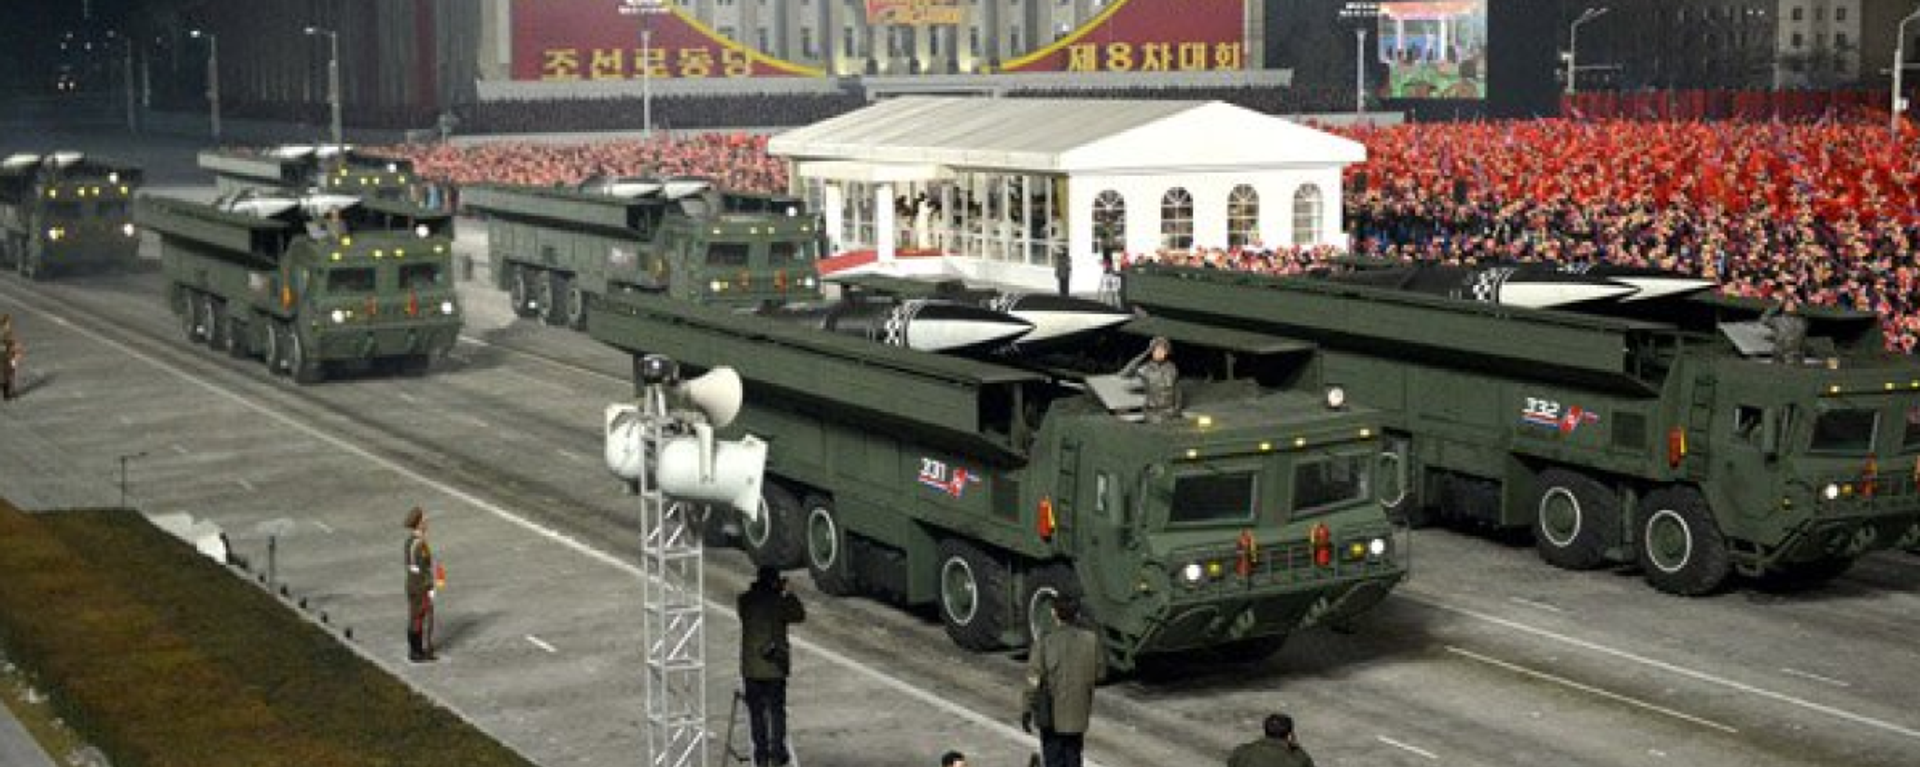 A short-range solid fueled missile previously unknown to Western observers unveiled at a January 14, 2021 military parade in Pyongyang, DPRK - Sputnik International, 1920, 08.10.2022